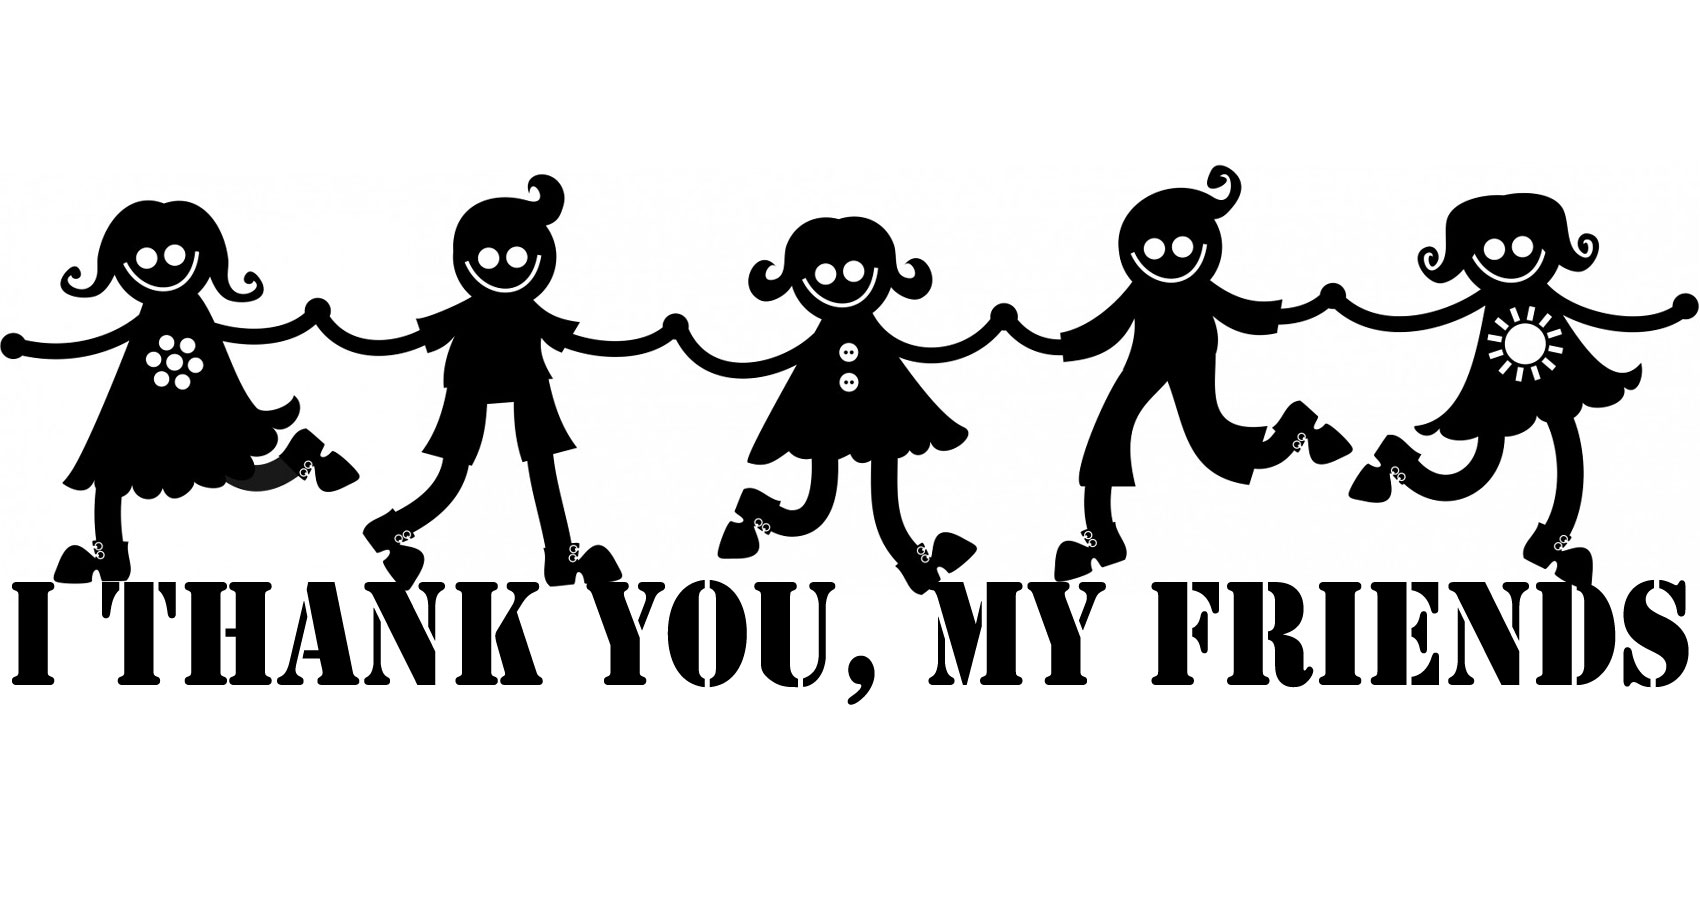 I Thank You, My Friends by Donna Africa at Spillwords.com